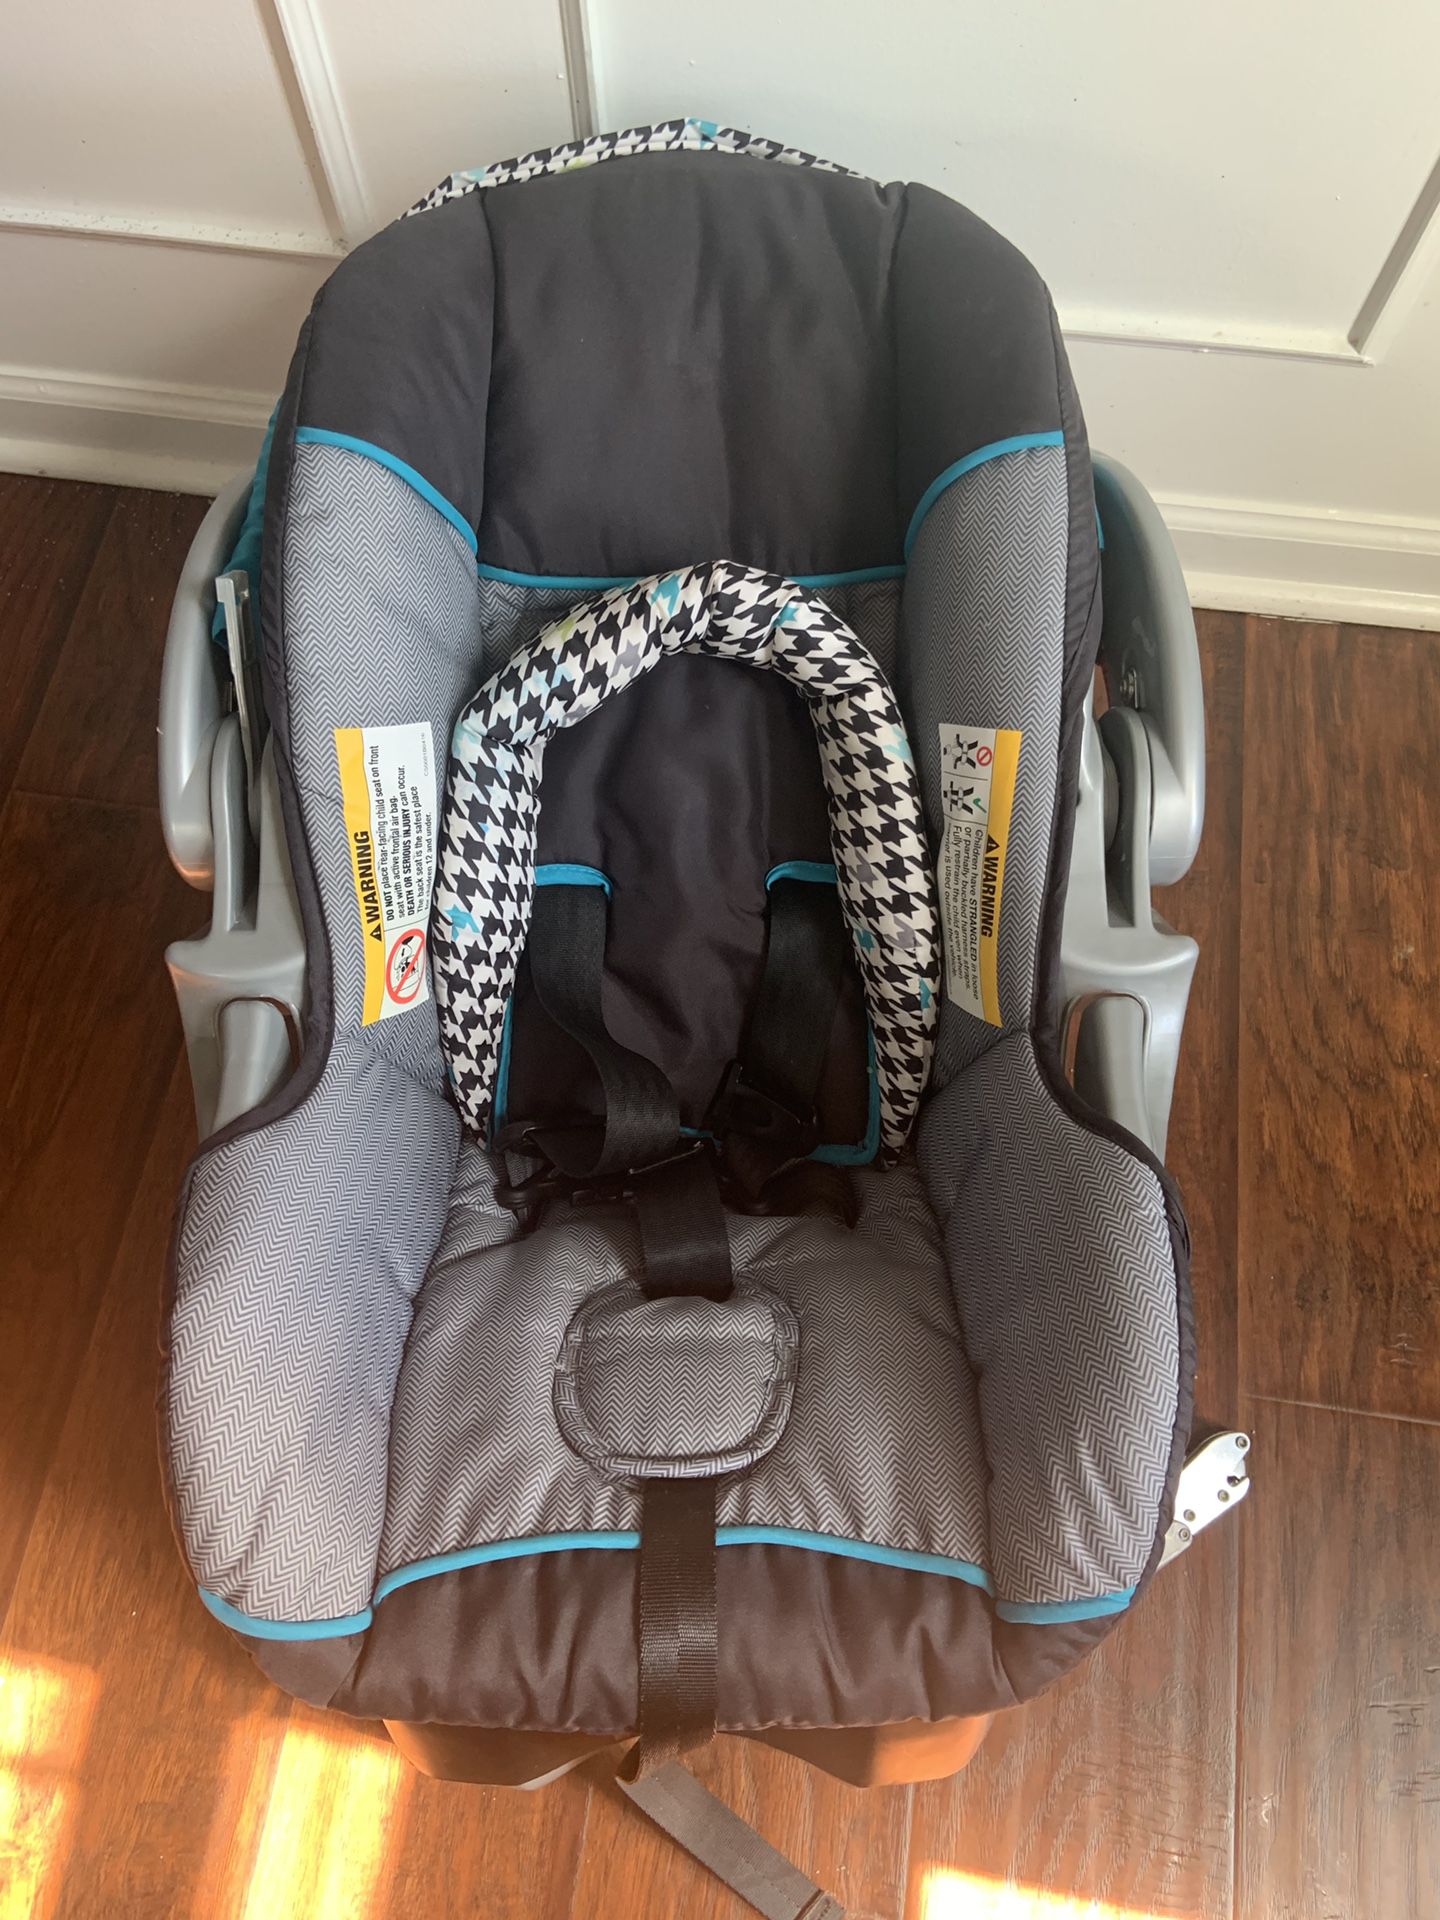 Car seat and stroller come together I’ll do 50 for both